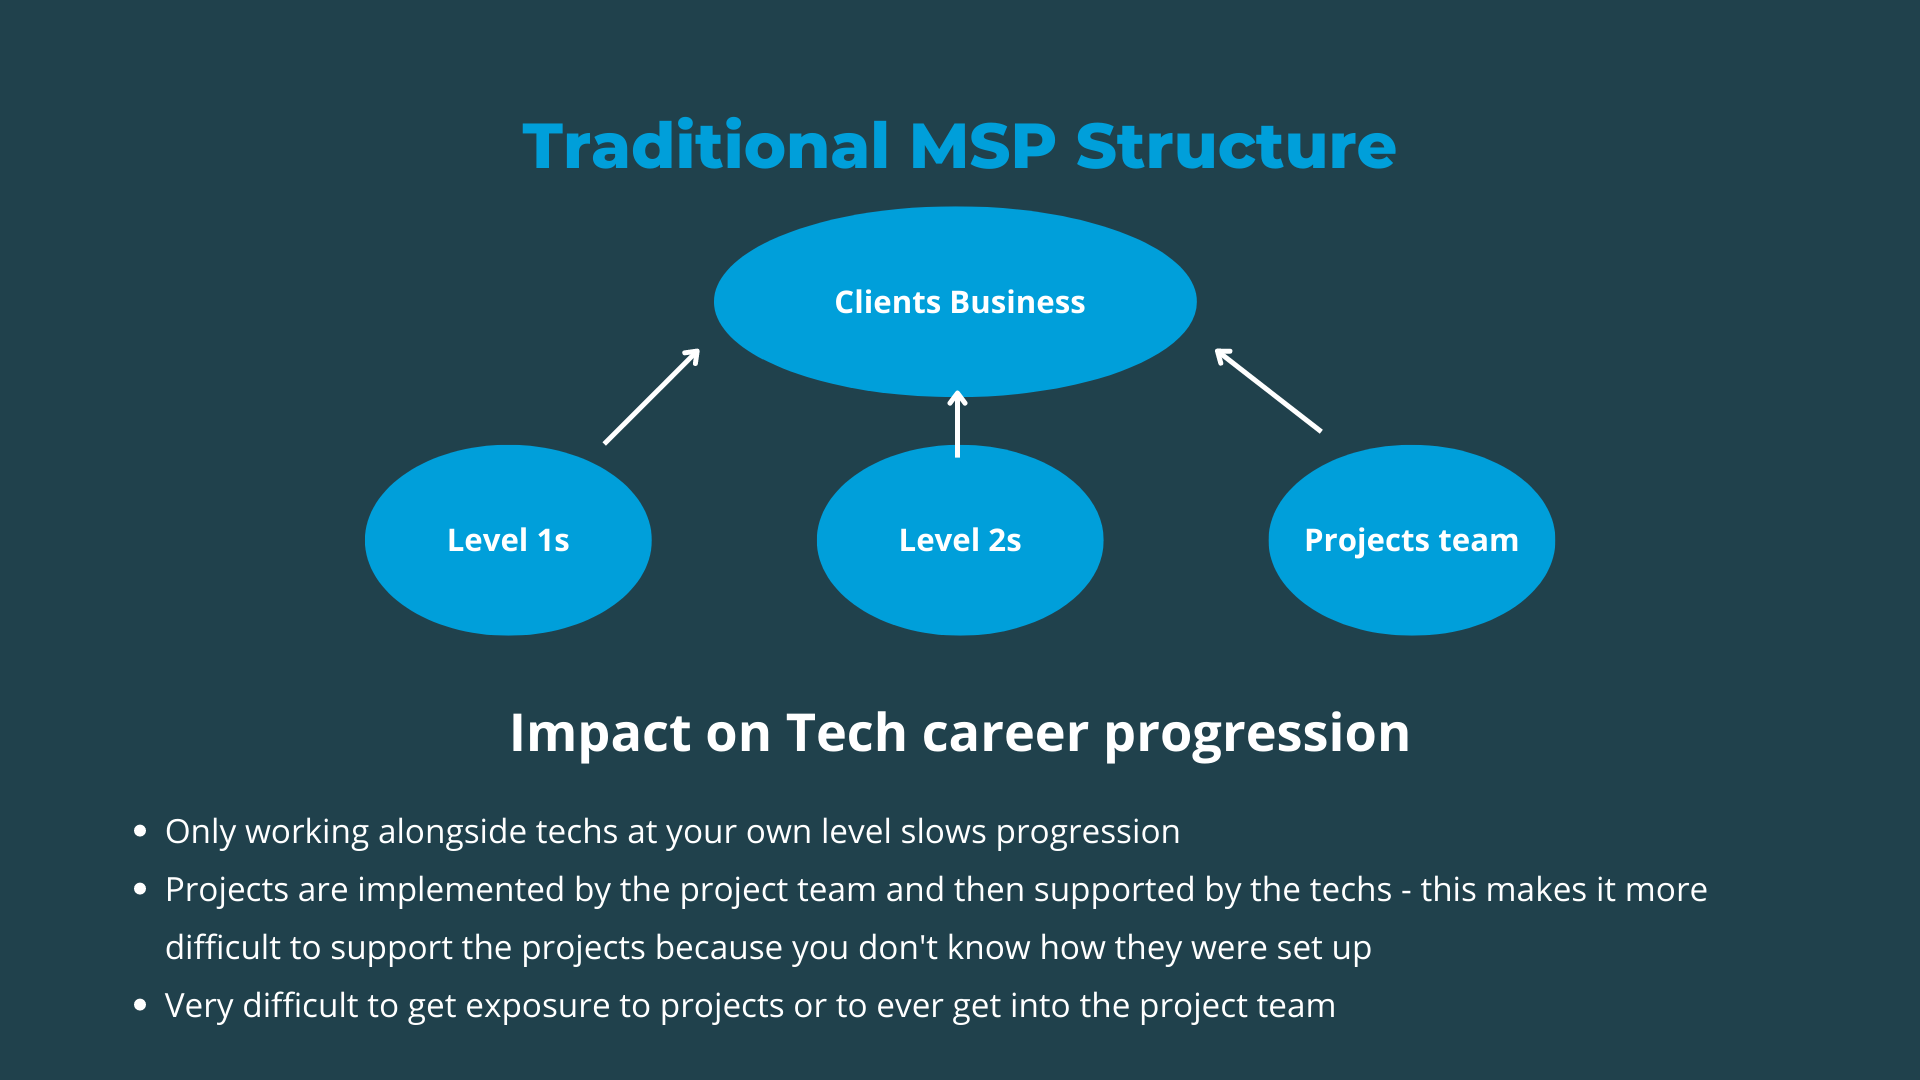 Traditional MSP role